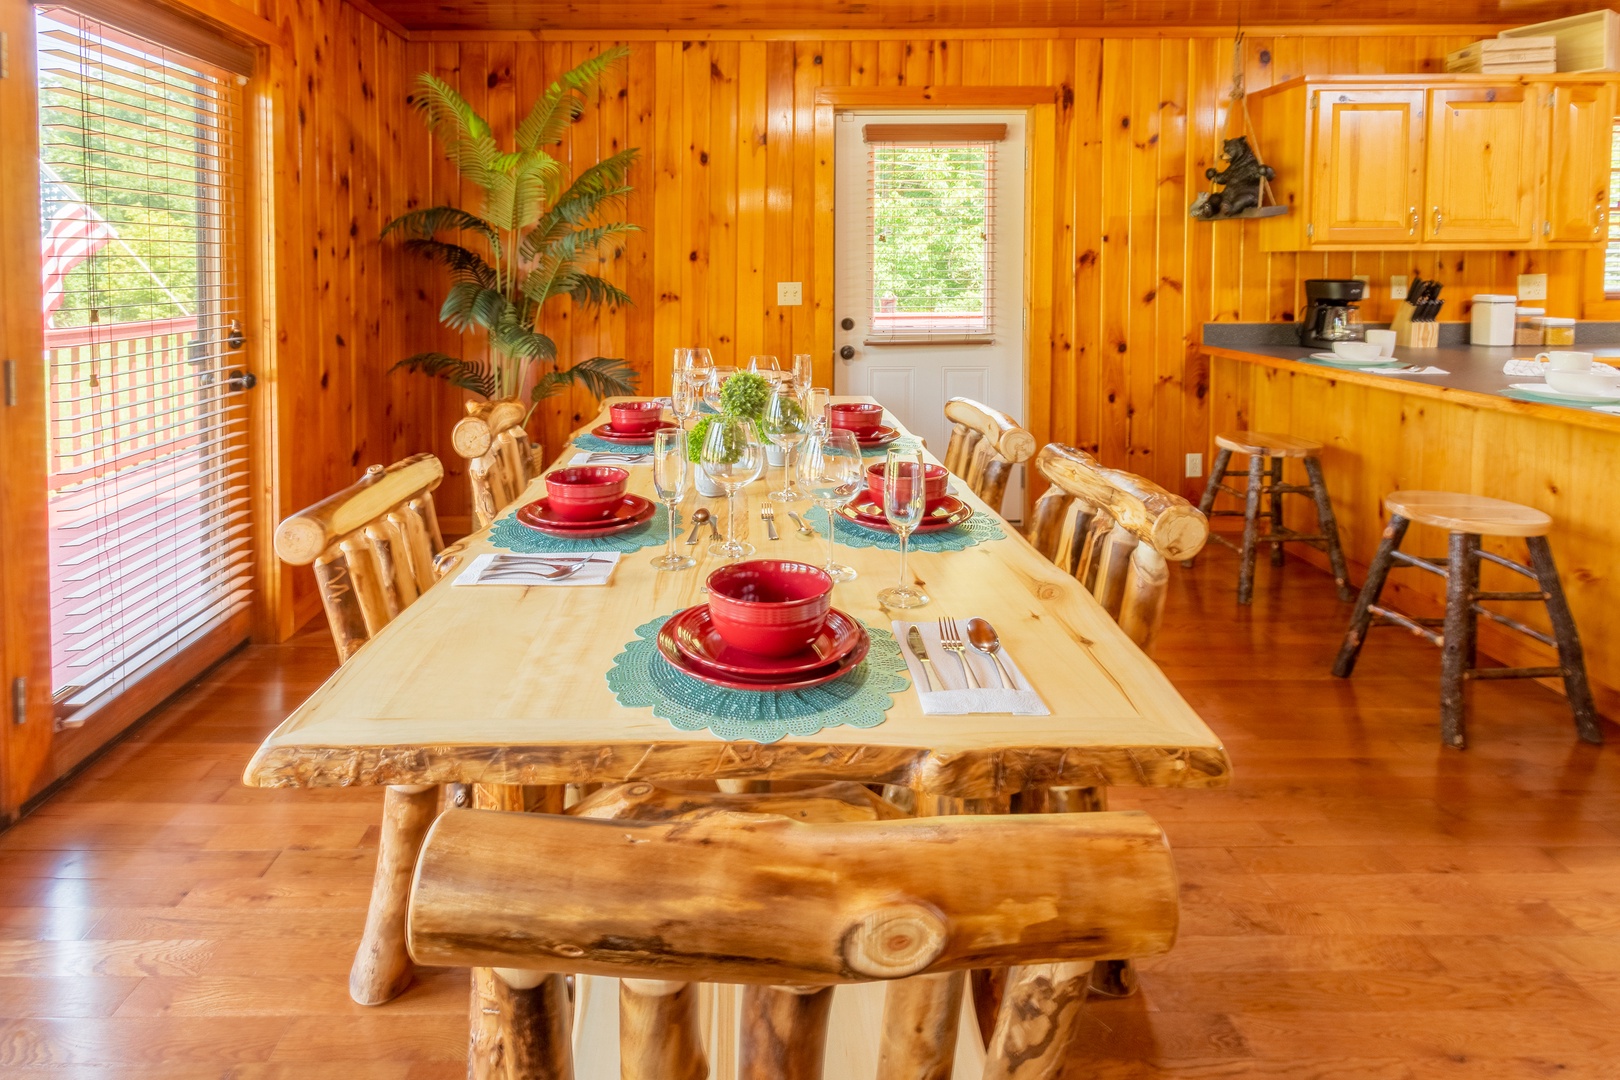 Log dining table for 6 at 1 Crazy Cub, a 4 bedroom cabin rental located in Pigeon Forge